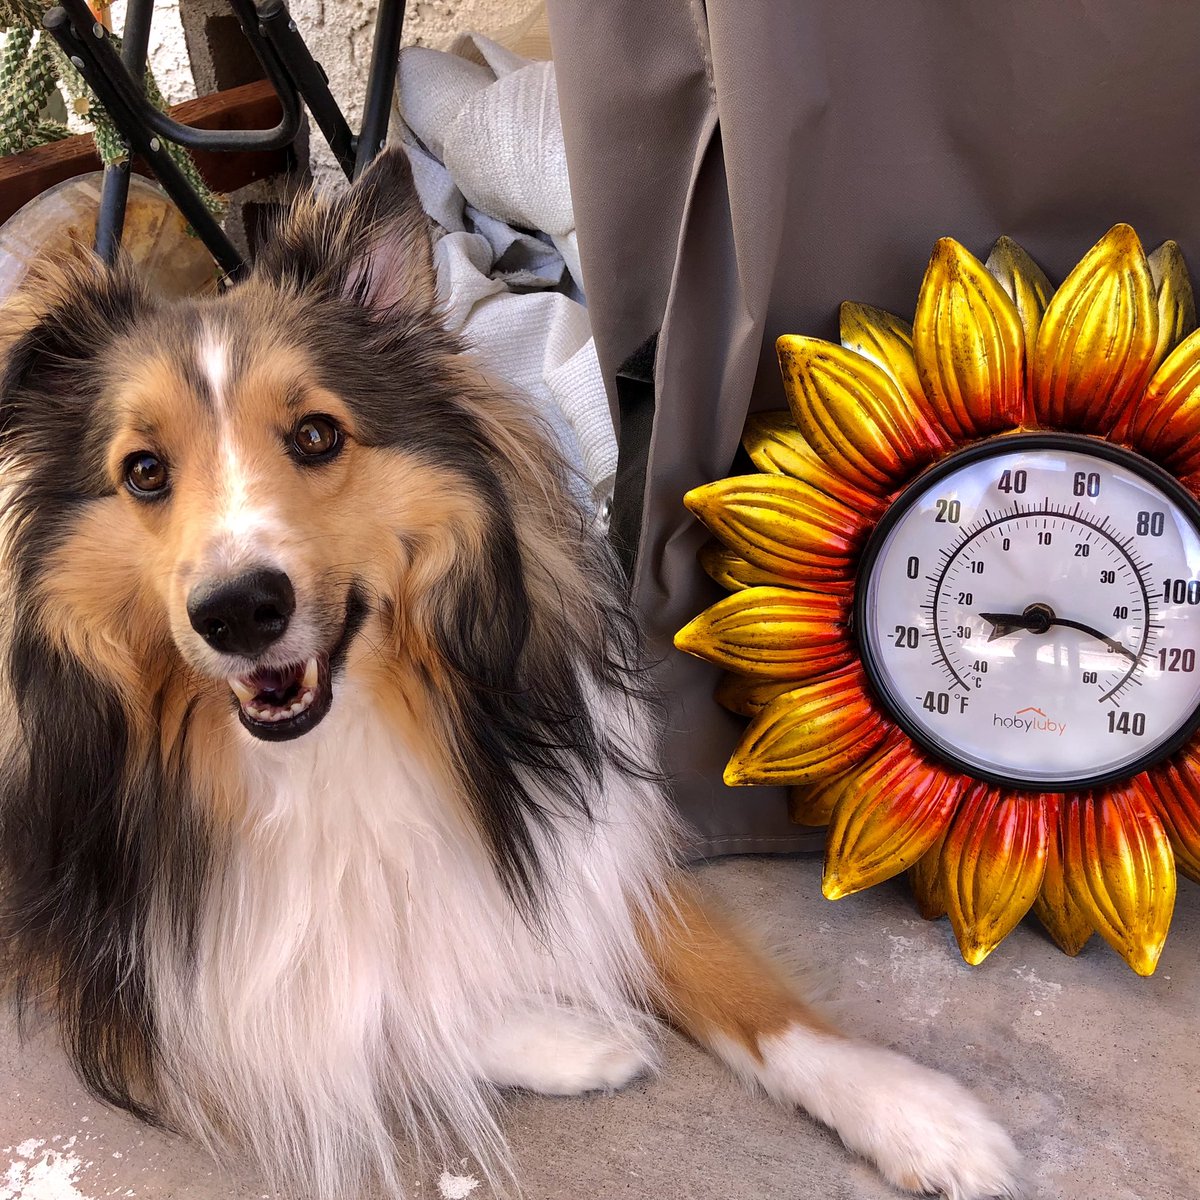 It is too hot for the thermometer! 😅🥵🤯😳
 #heatwave #Heatwave2022 #hot #Wednesday #Dog #DogsAreFamily #DogsofTwittter #sheltie #cute #CuteAnimals #Wednesdayvibe